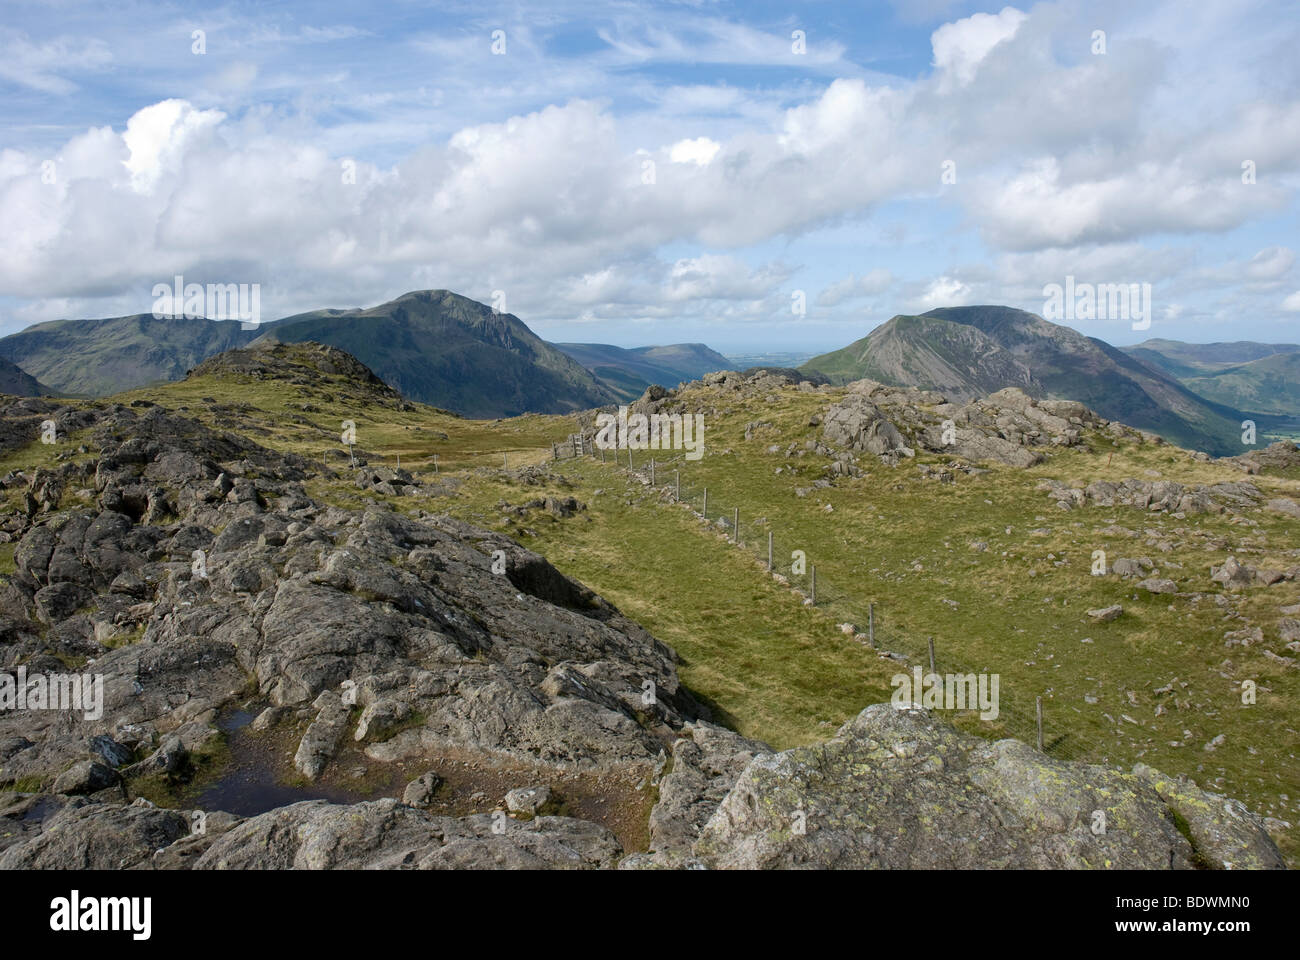 View across Cumbrian Mountains from Grey Knotts towards Pillar, Red Pike, High Crag and High Stile Stock Photo